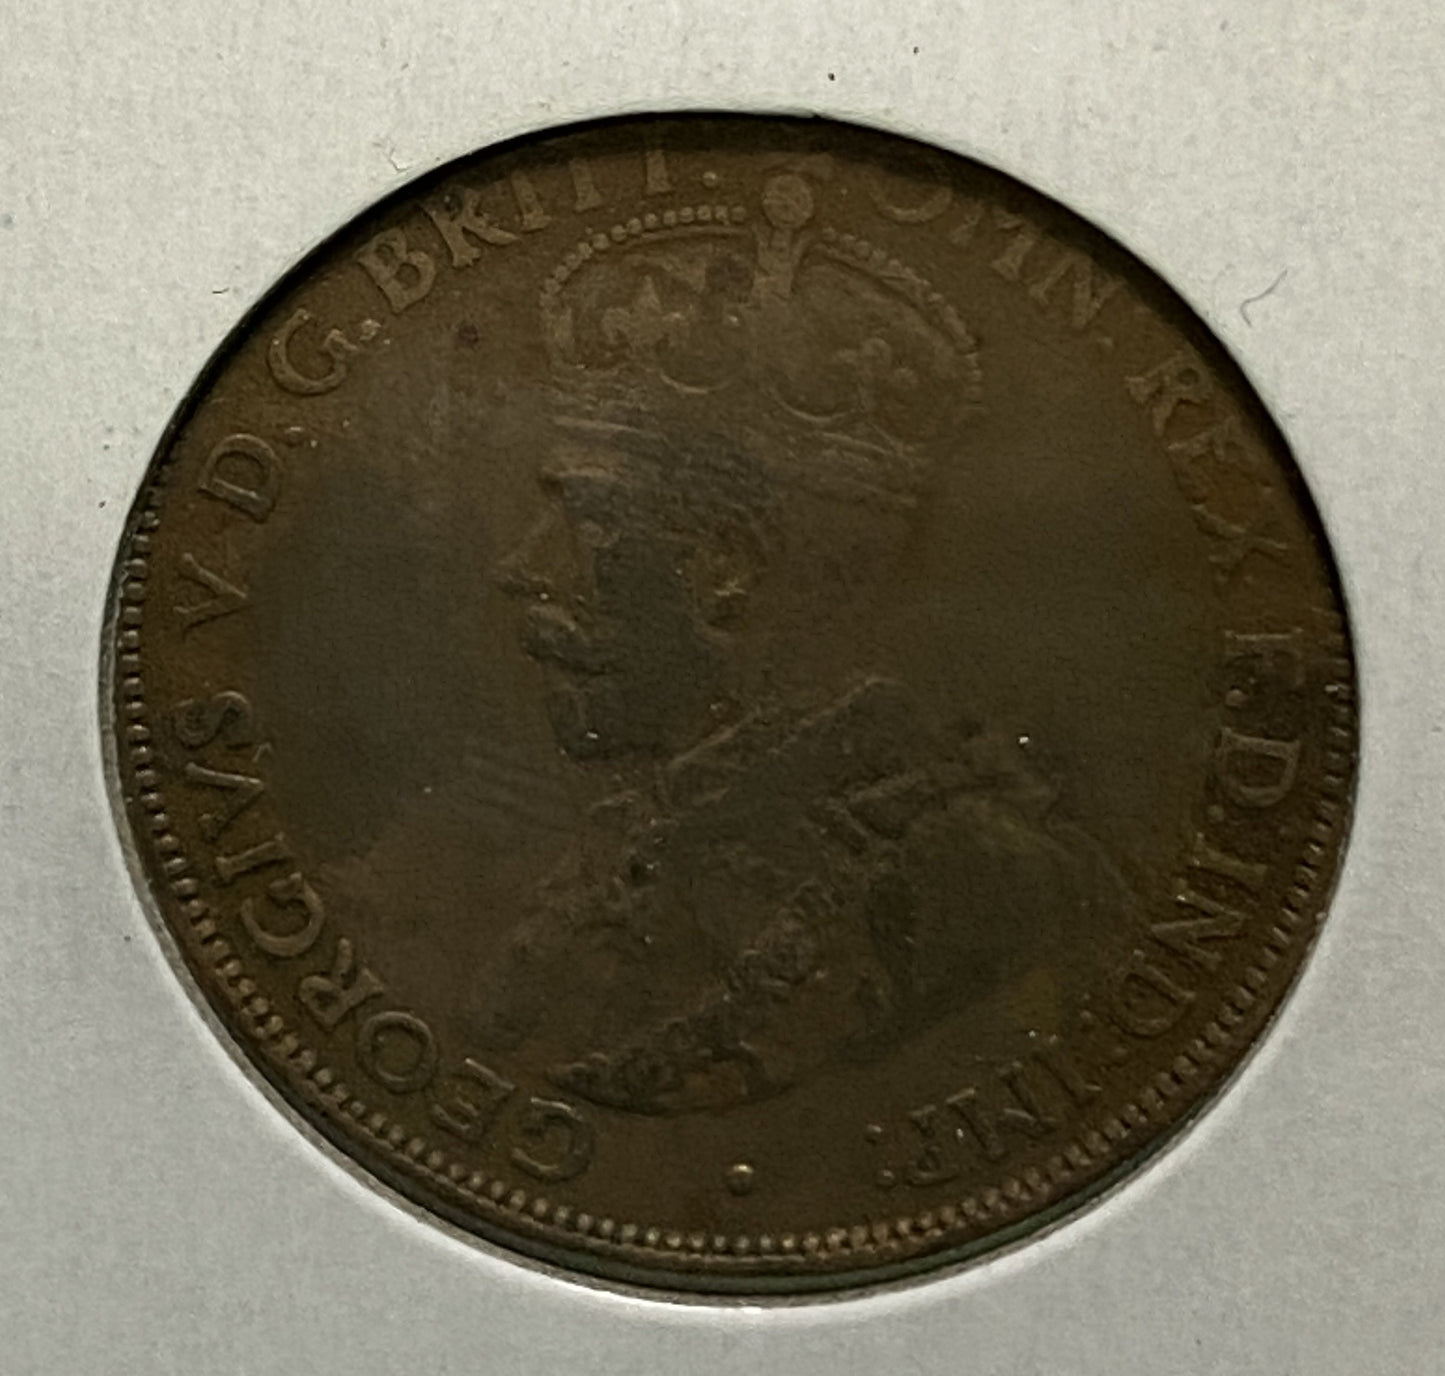 Australian HALF PENNY COIN 1926 KING GEORGE V ( F/VF ) CONDITION